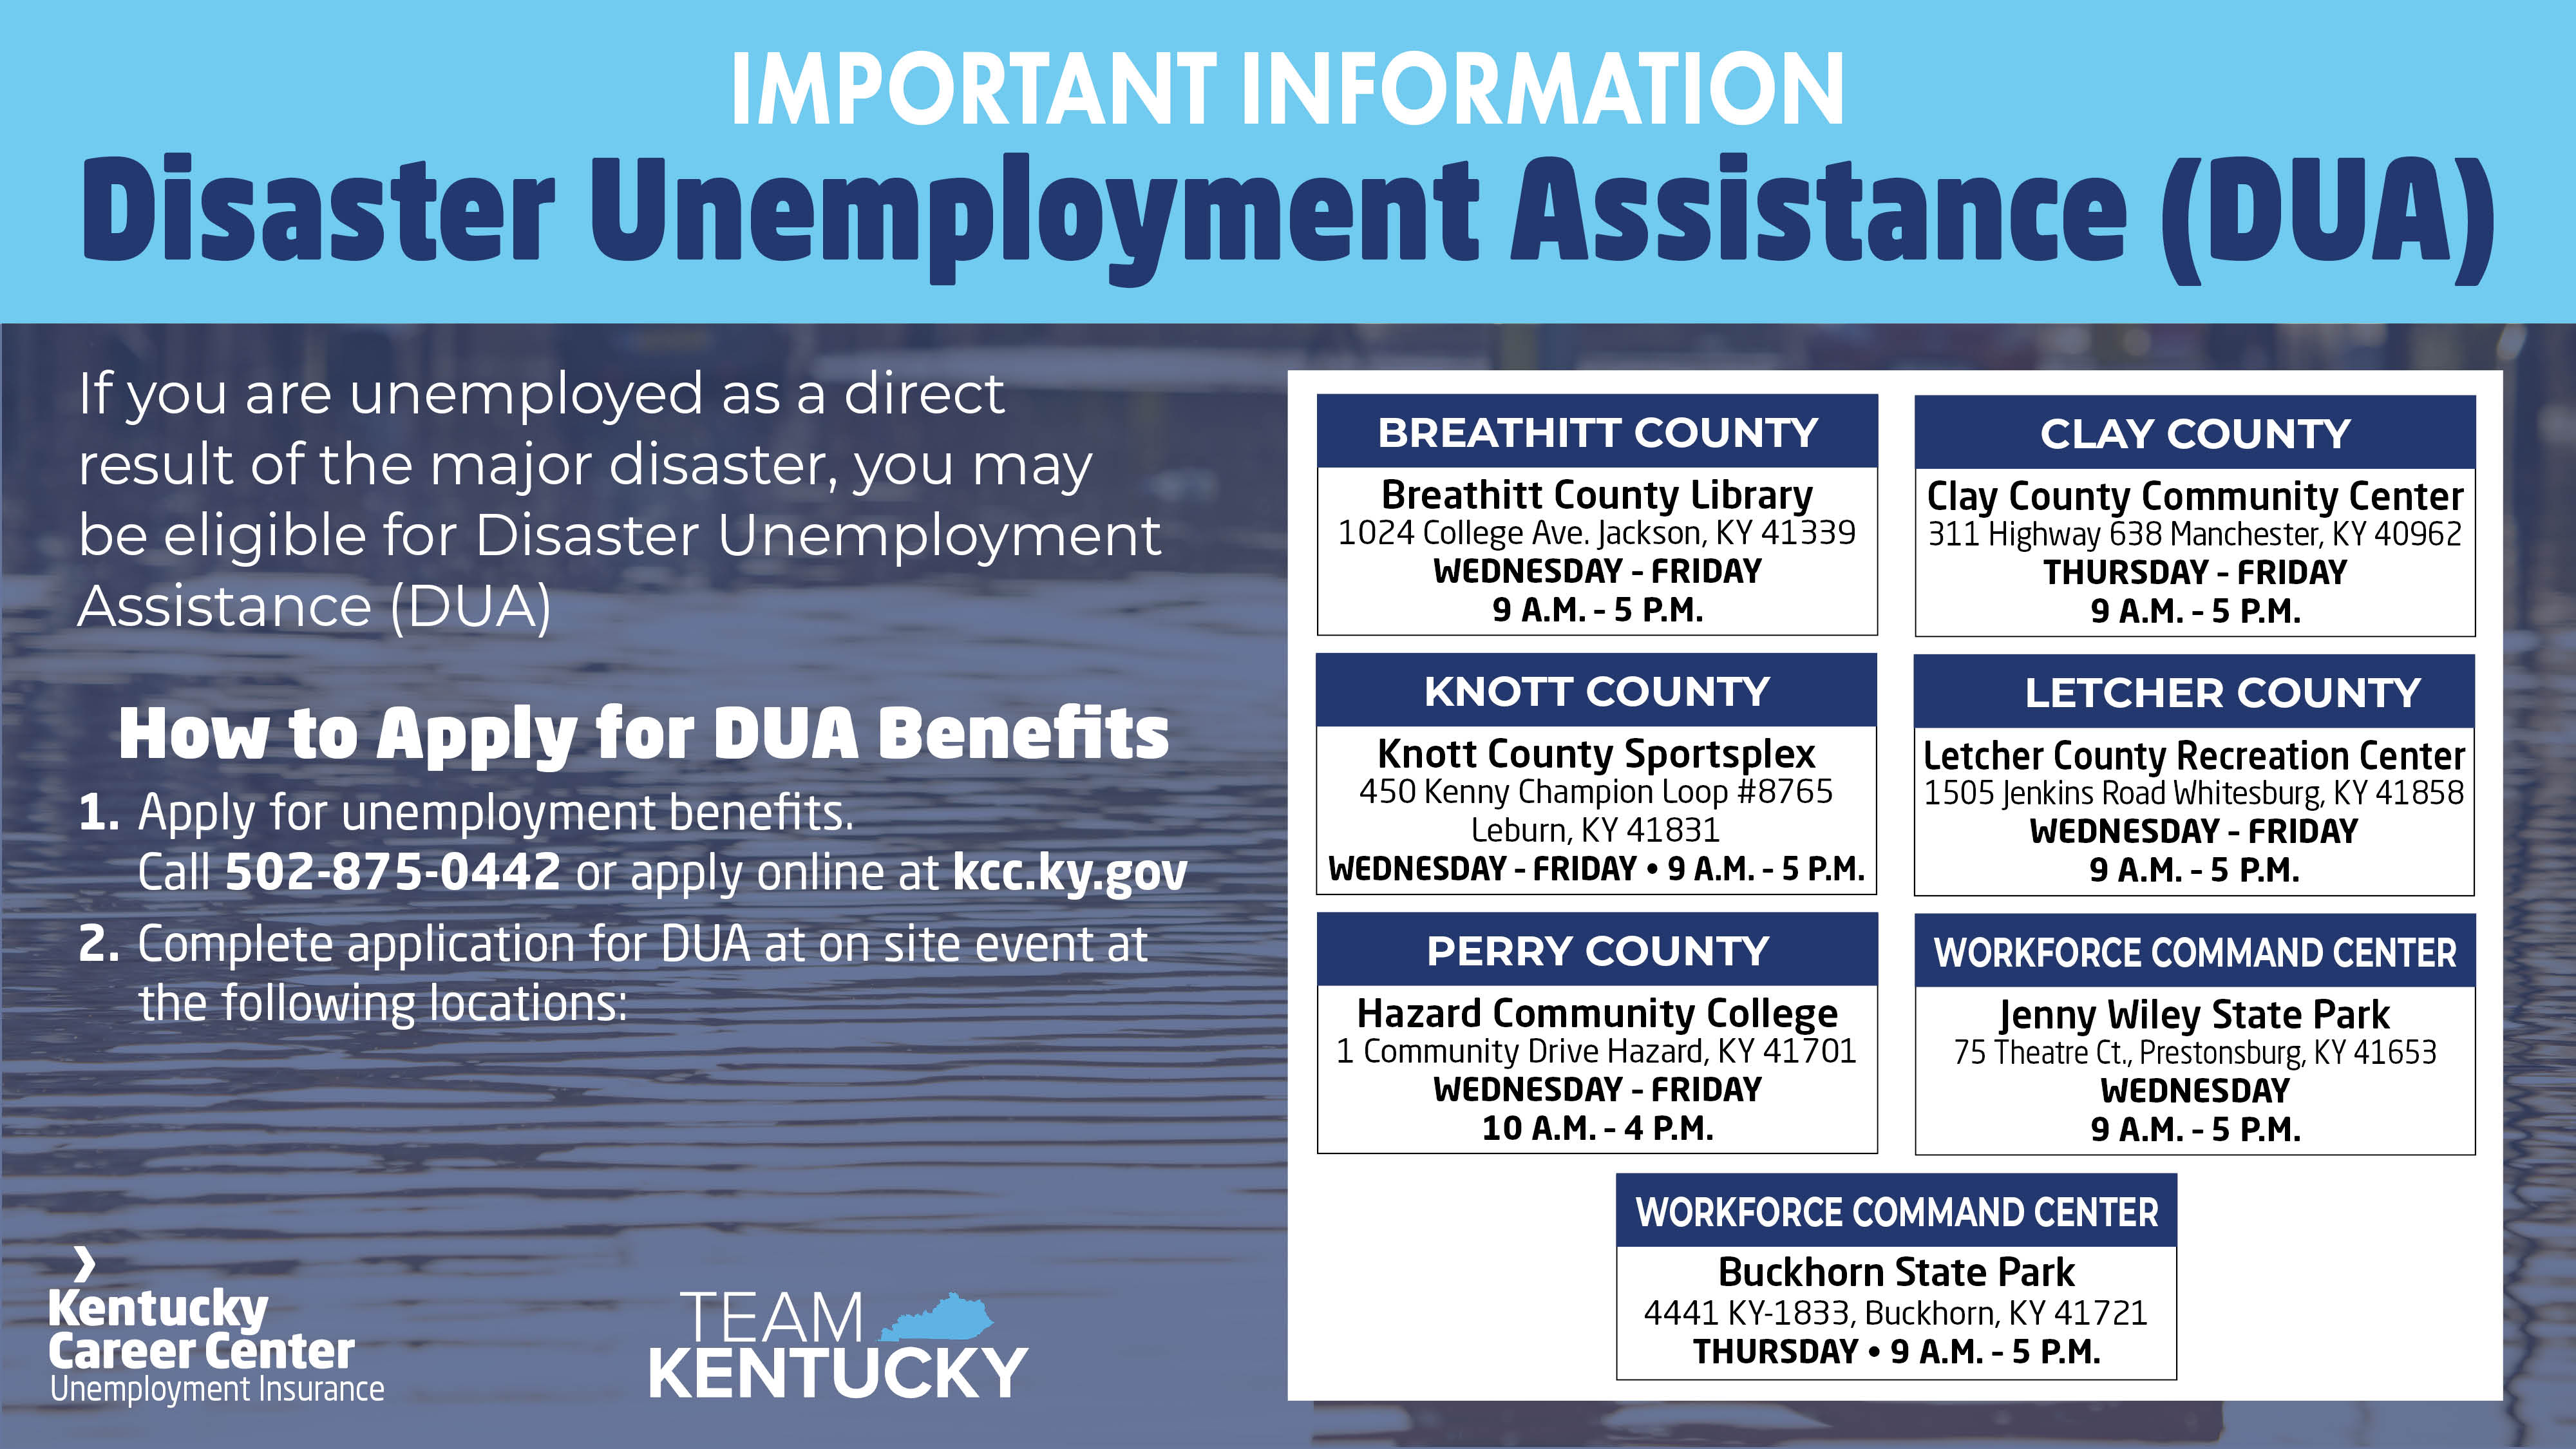 DUA Claimants - Get Help With Applications at the Following Eastern Kentucky Locations: